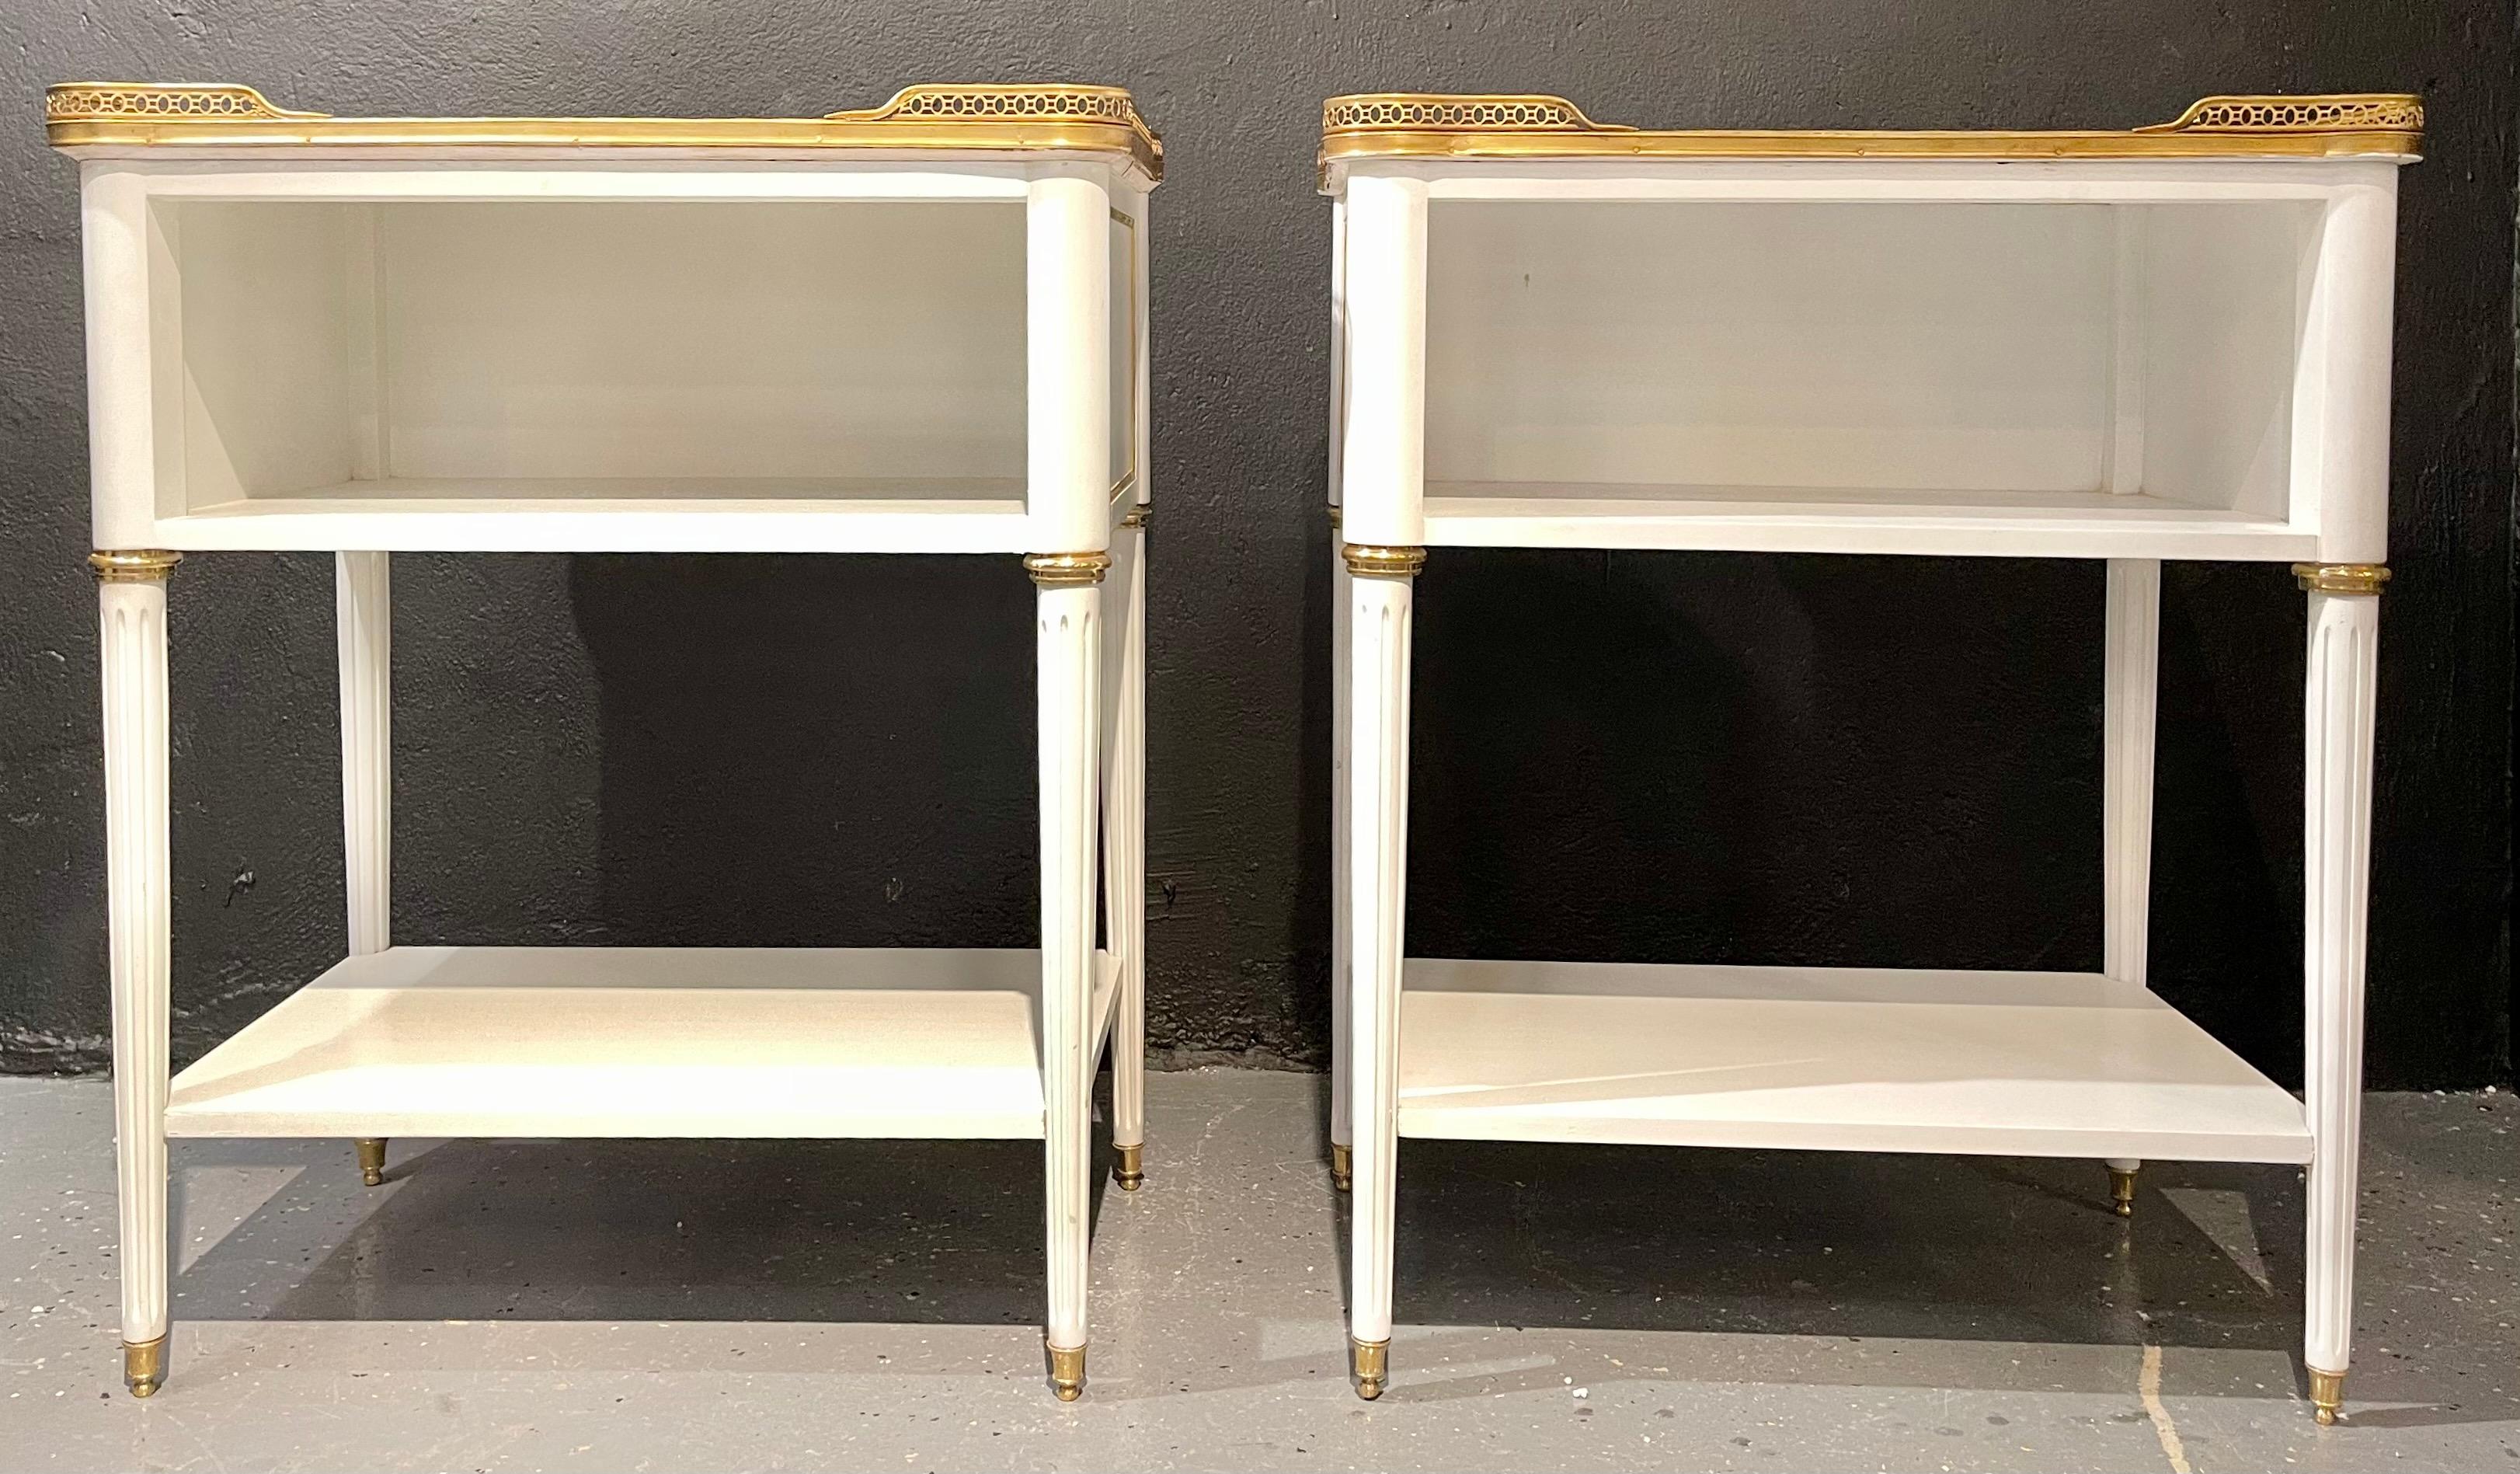 Pair of Swedish neoclassical open nightstands or end tables in the manner of Maison Jansen. These finely crafted open end tables are simply stunning. The Carrara white and gray veined marble tops have rounded corners and sit inside a pierced bronze